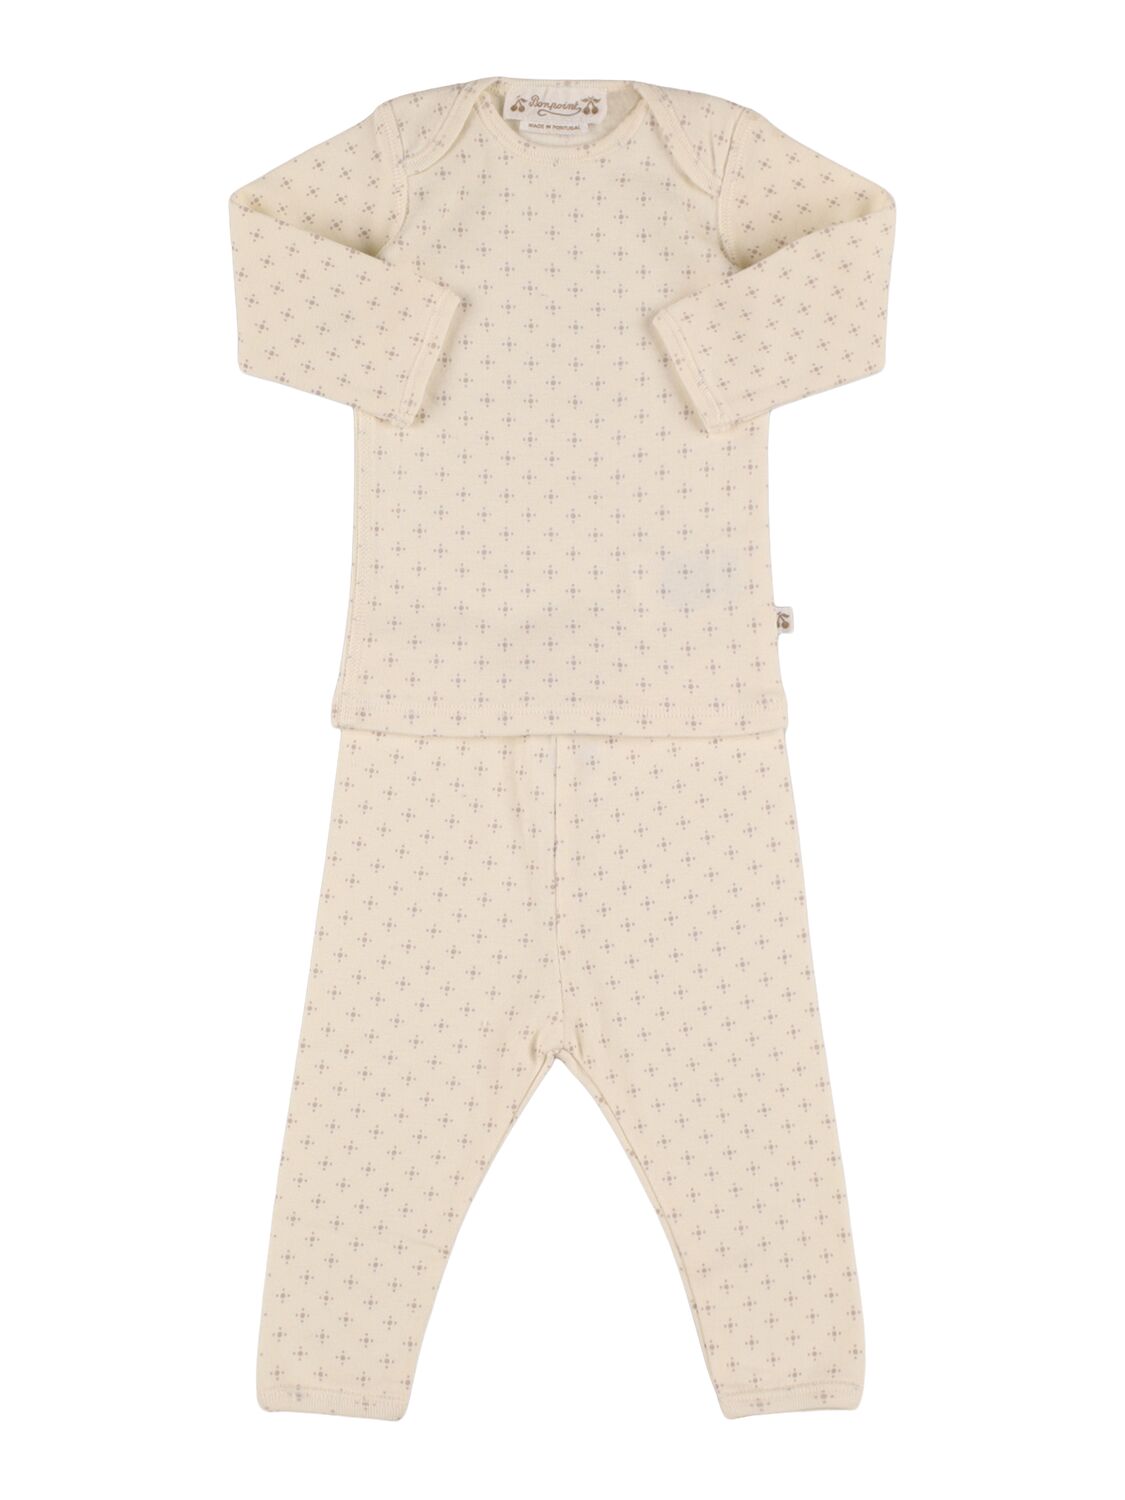 Bonpoint Babies' Printed Cotton T-shirt & Trousers In Neutral